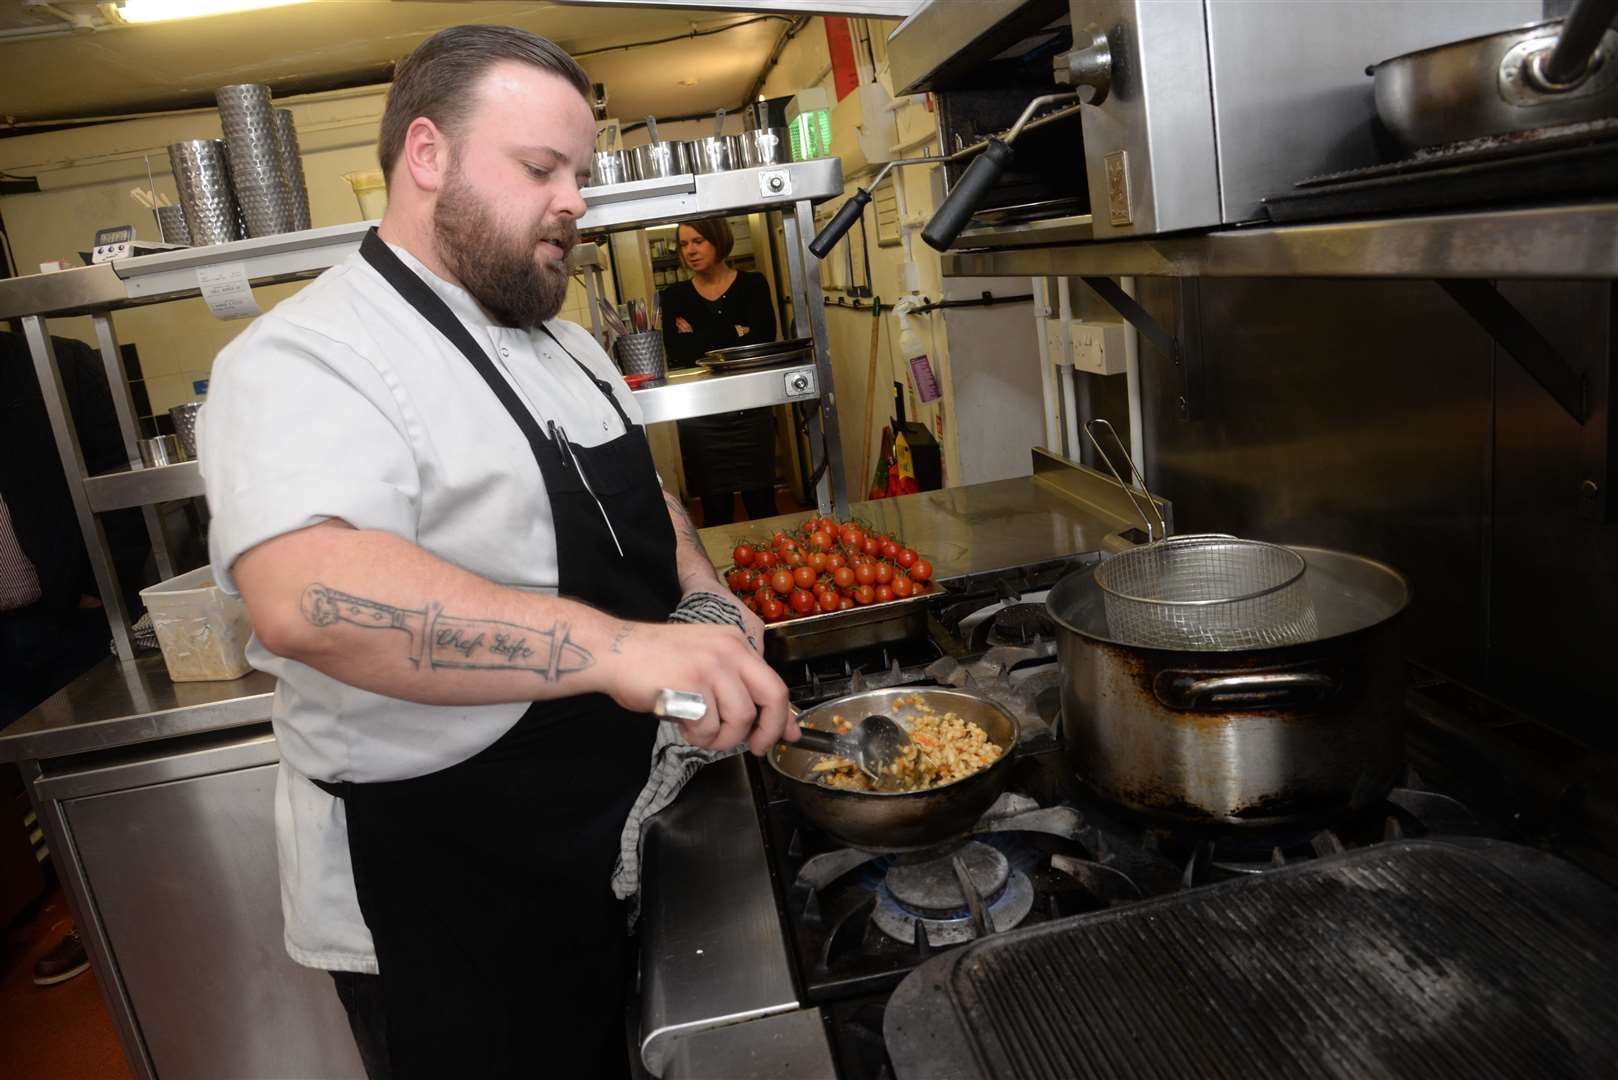 Chef Ray Clear at The Butchers Block in Burnham which won Dining Pub or Bistro of the Year